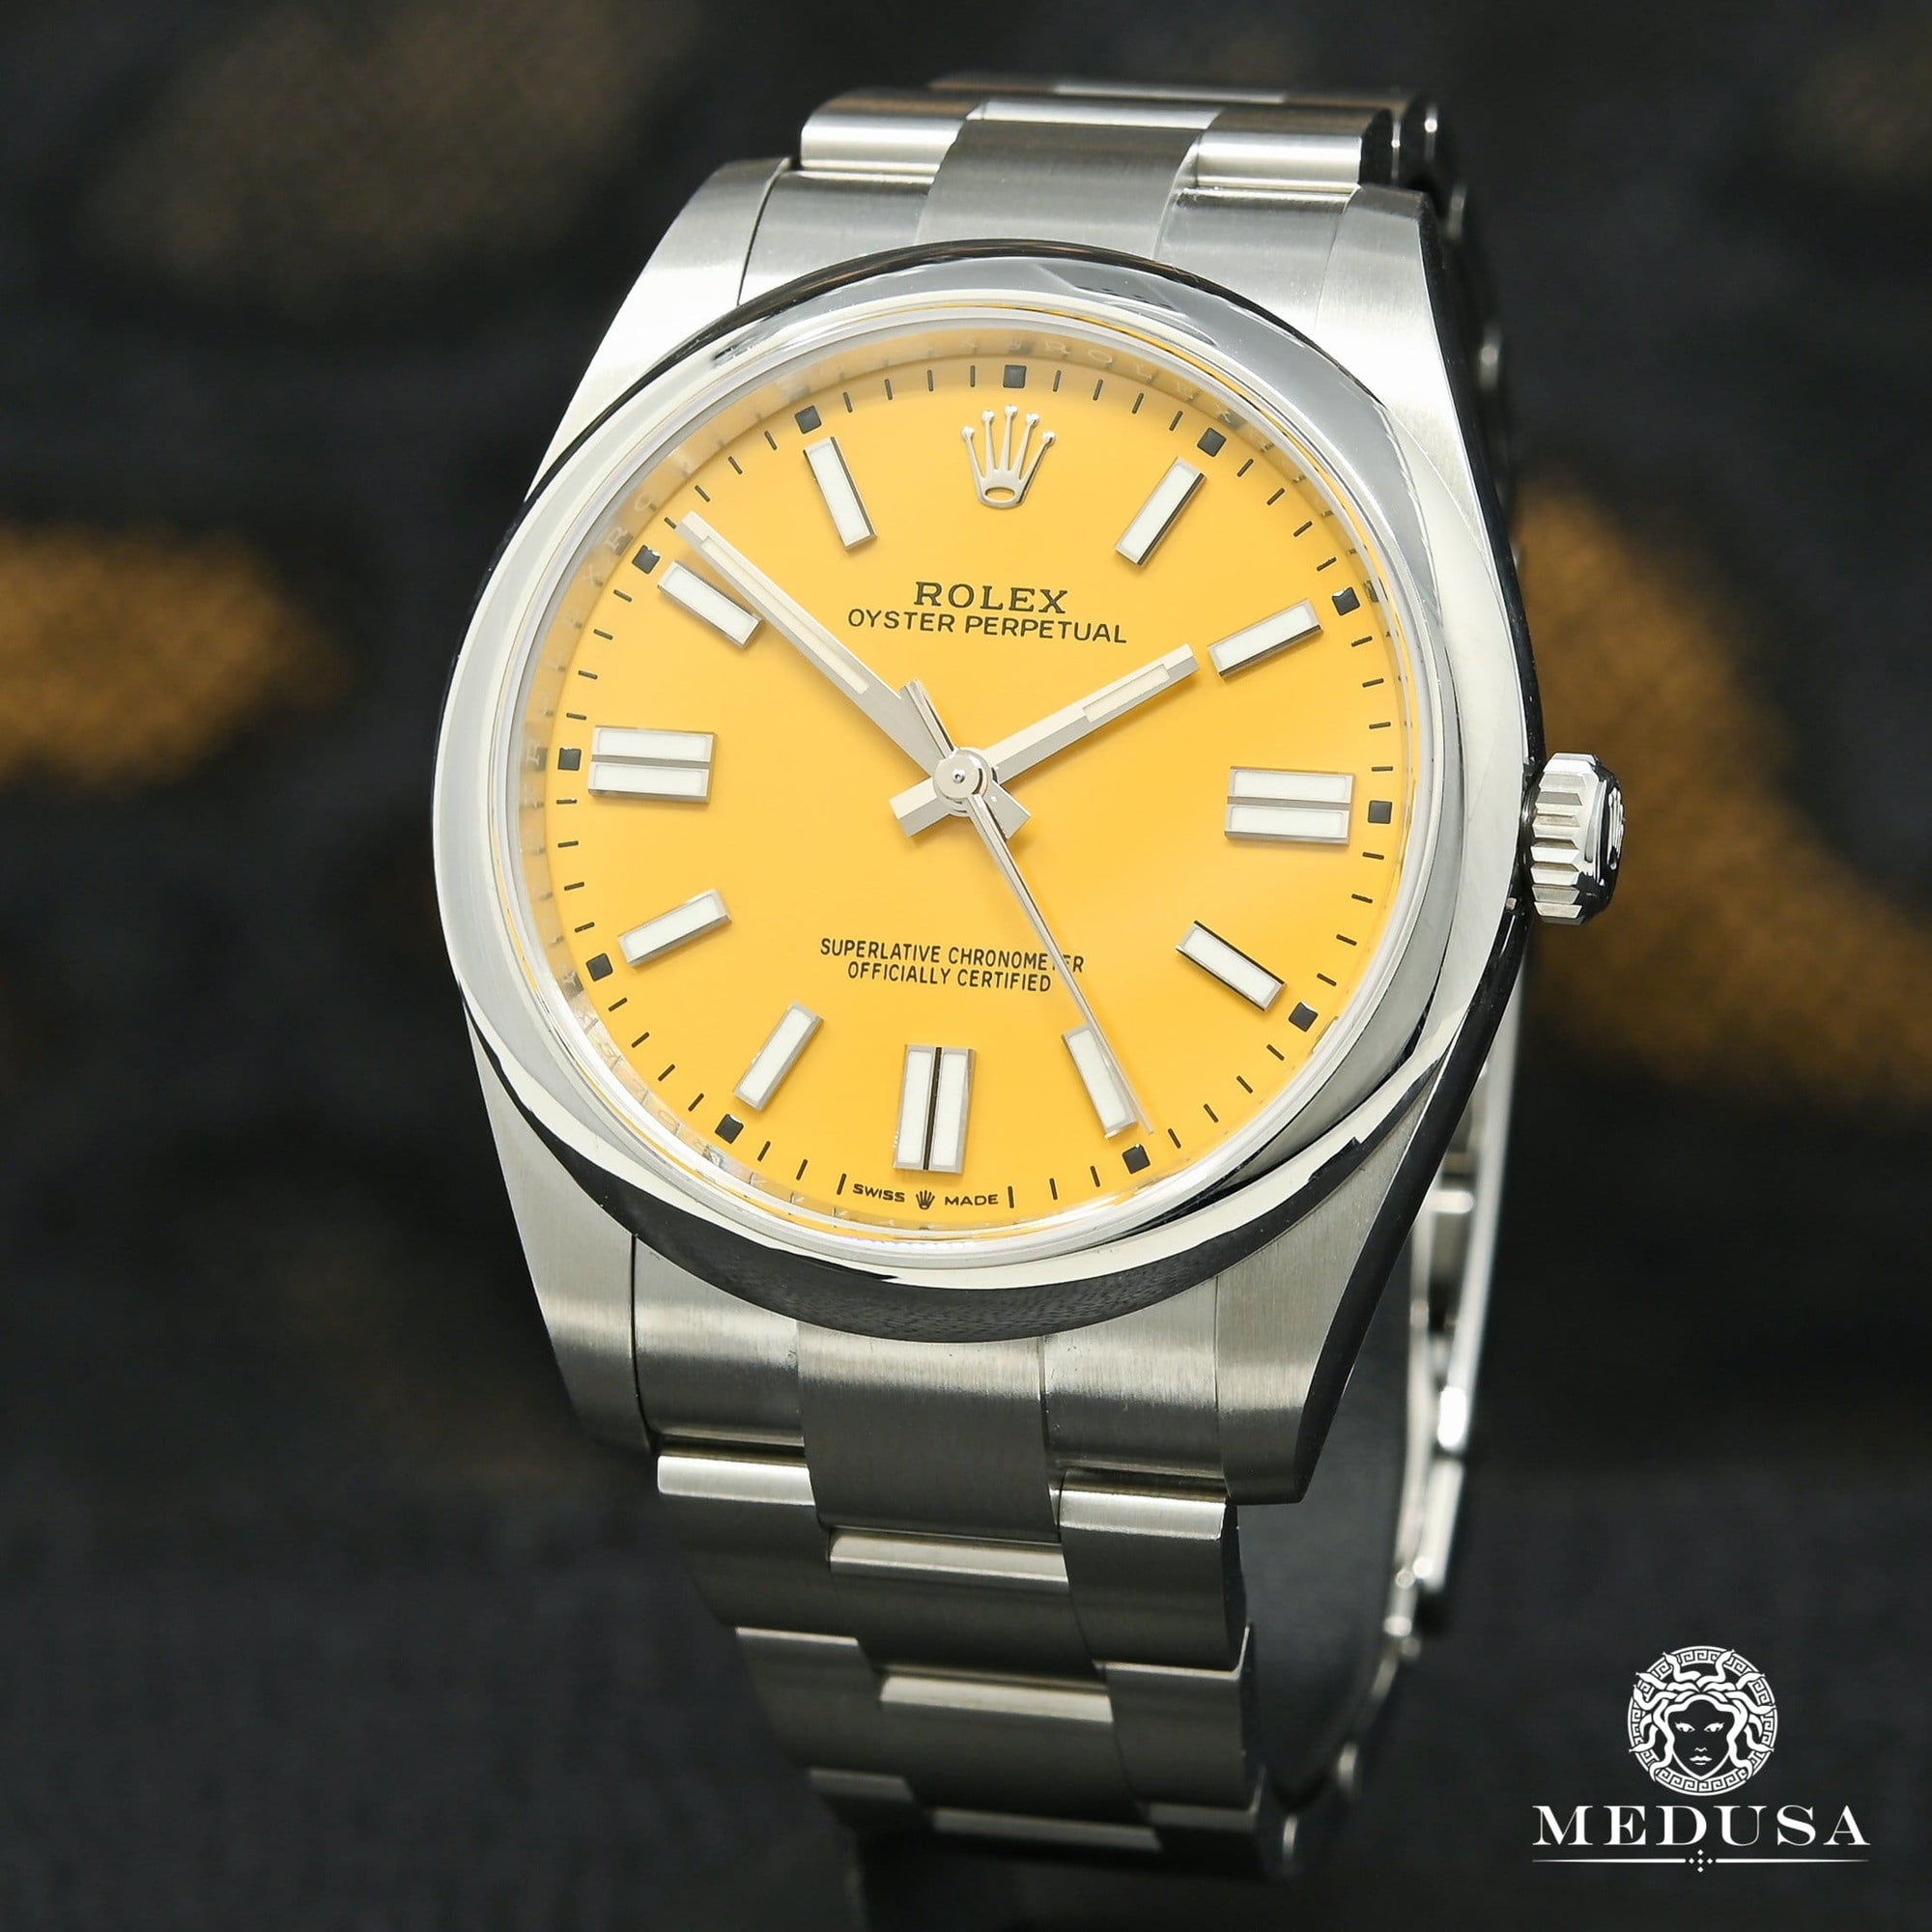 Rolex watch | Rolex Oyster Perpetual 41mm Men's Watch - Yellow Stainless